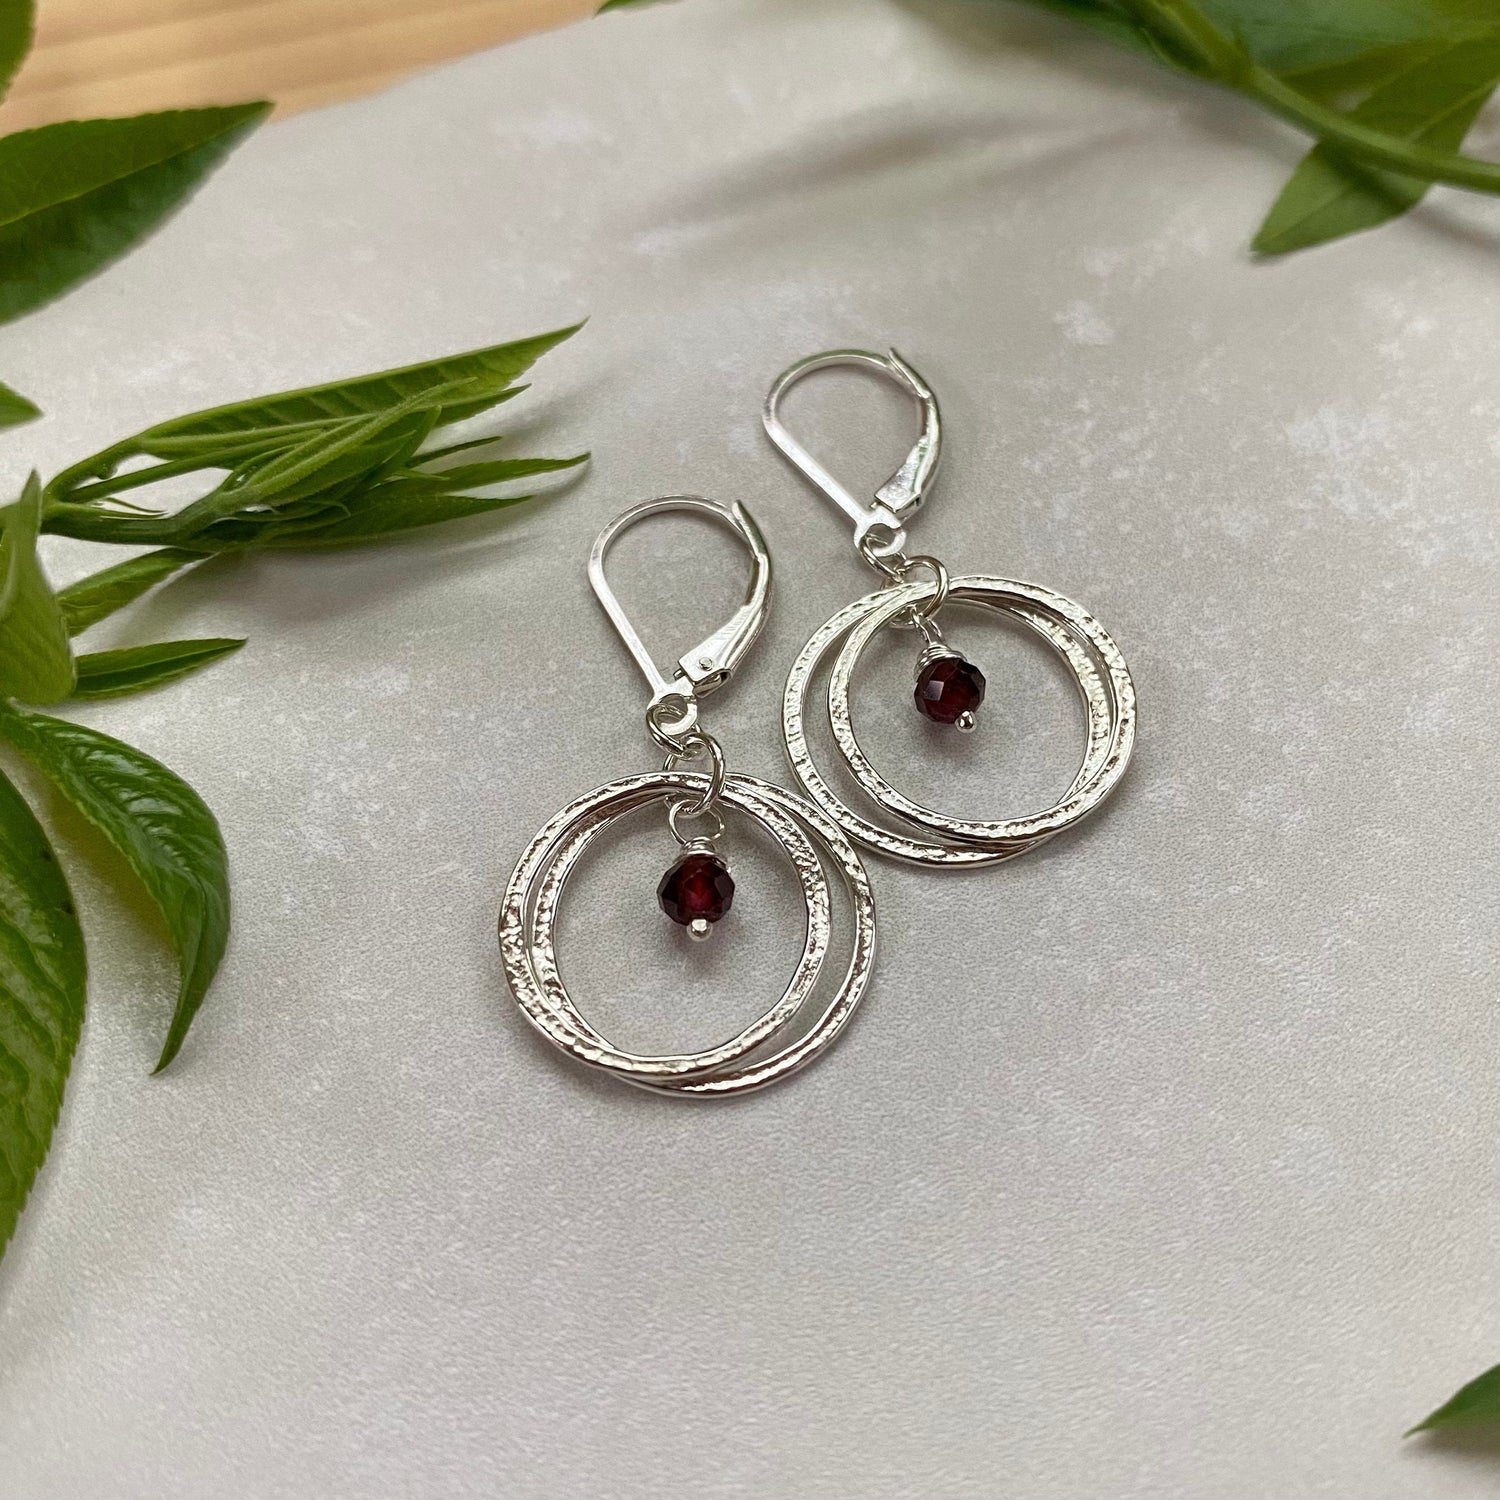 Sterling Silver Sparkly Textured Double Hoop Earrings with Birthstones, 5/8" Circle Dangle Drop Minimalist Style, Elegant Birthday Gift